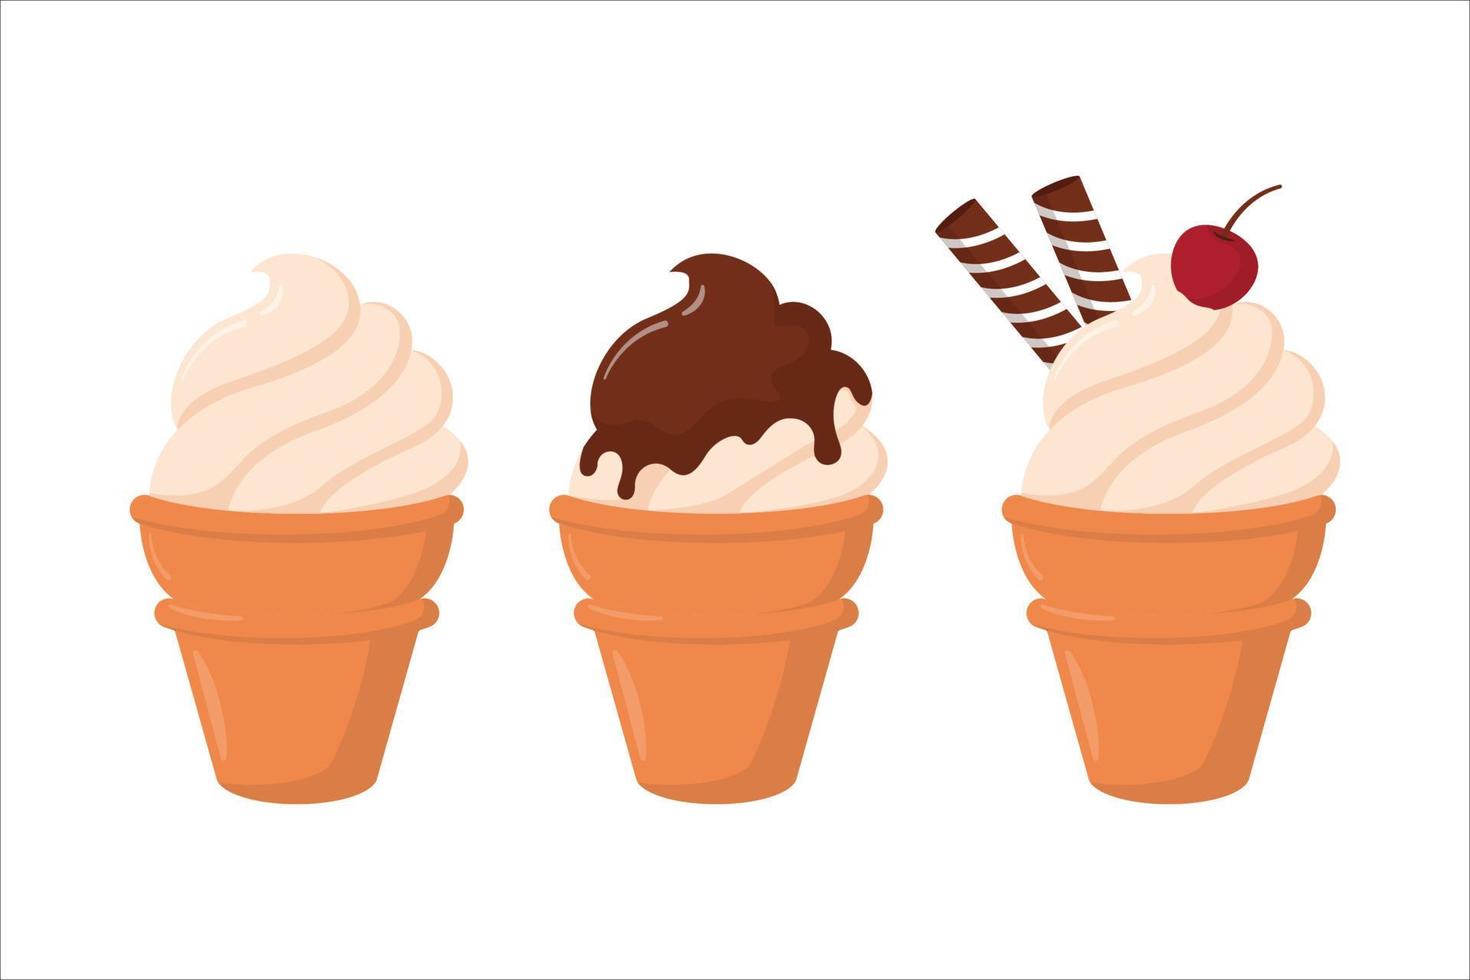 sweet ice cream illustration design with various toppings vector